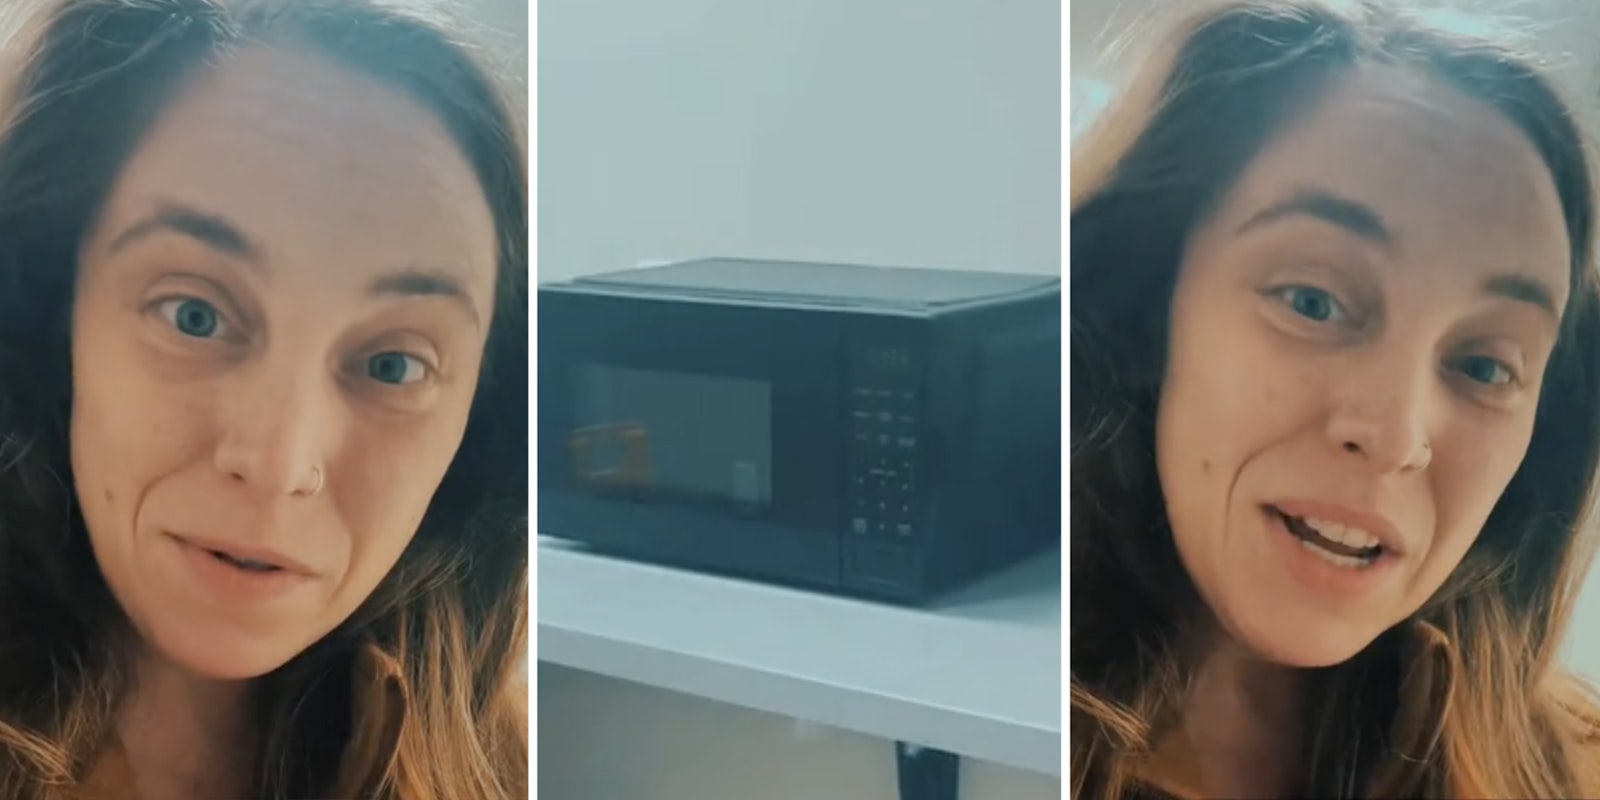 Woman talking(l+r), Microwave on table(c)